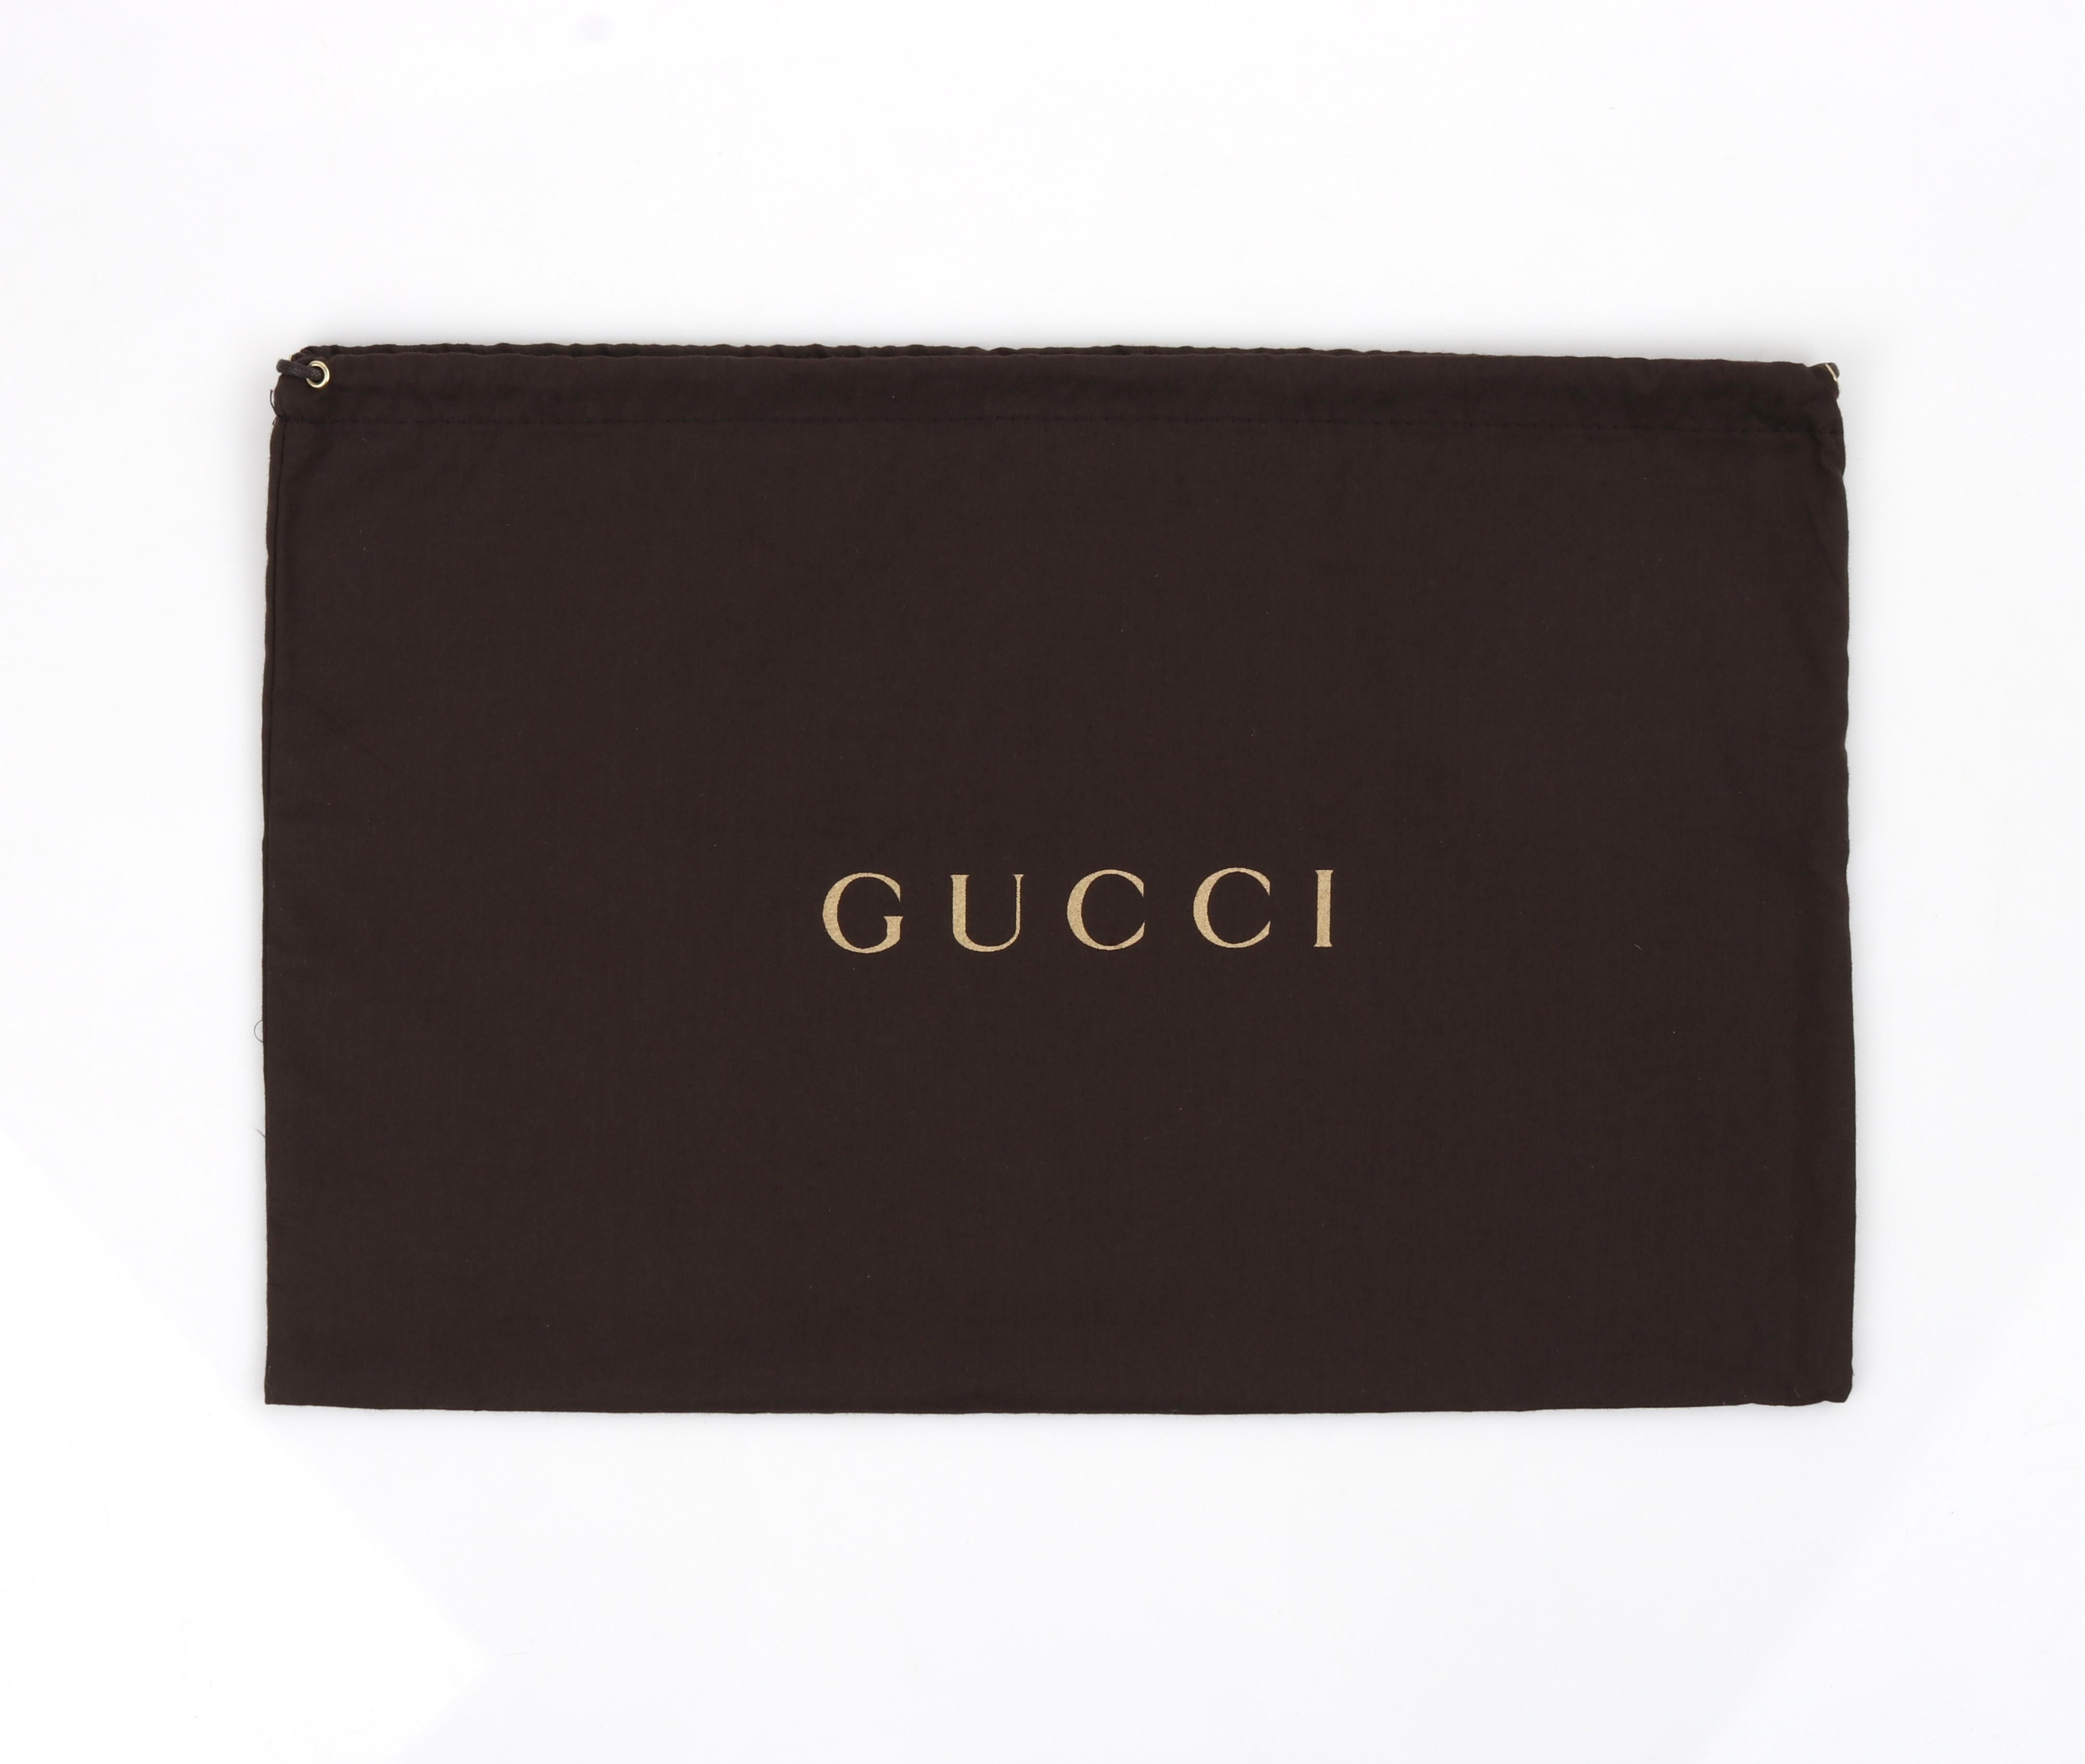 GUCCI “Microguccissima” Black Embossed Leather Zip Cosmetic Toiletry Travel Bag 5